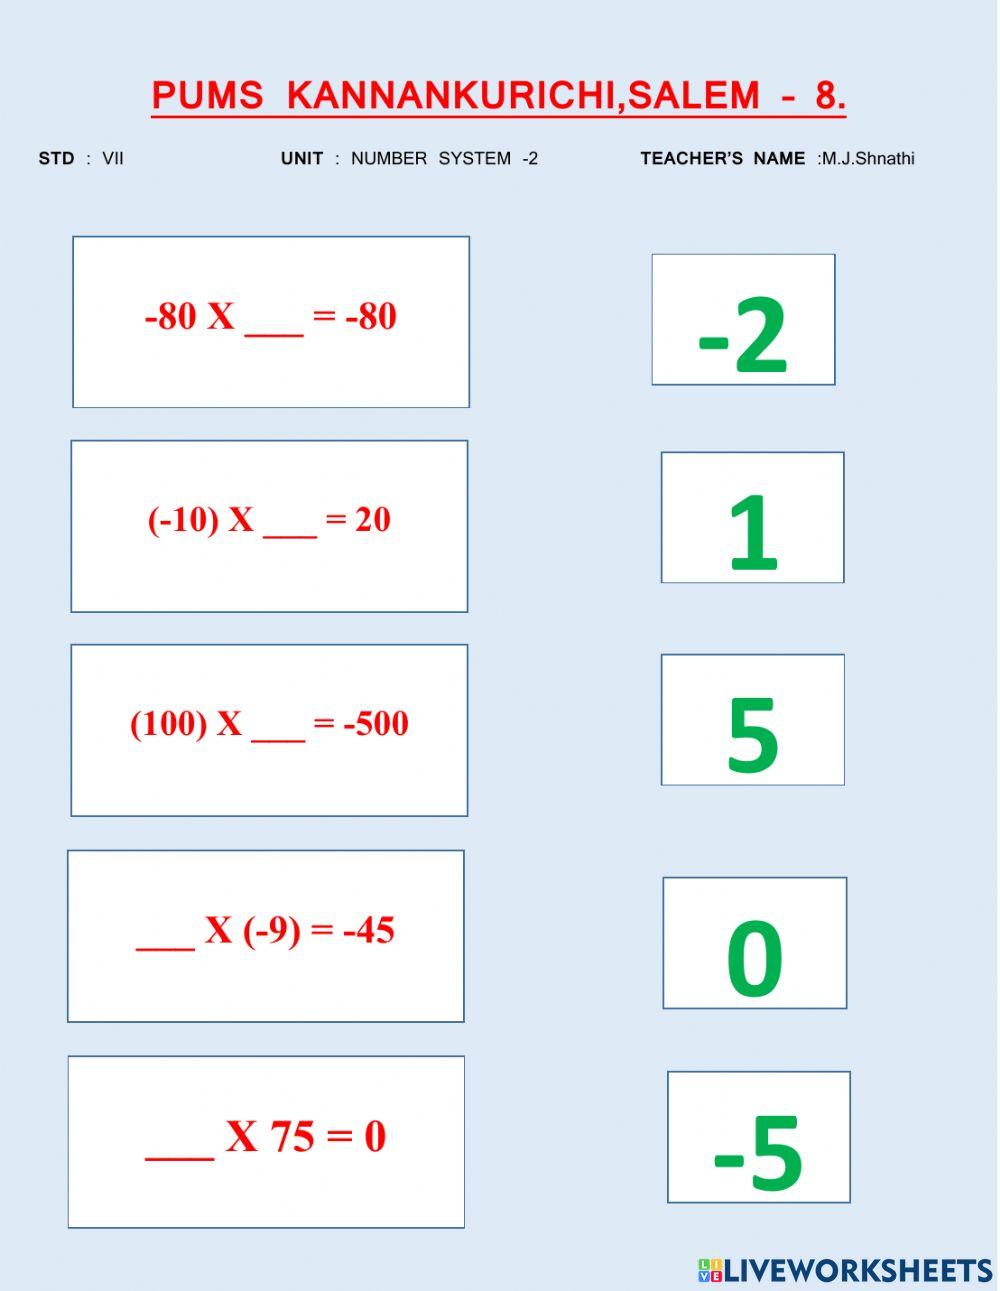 Numbers system -2